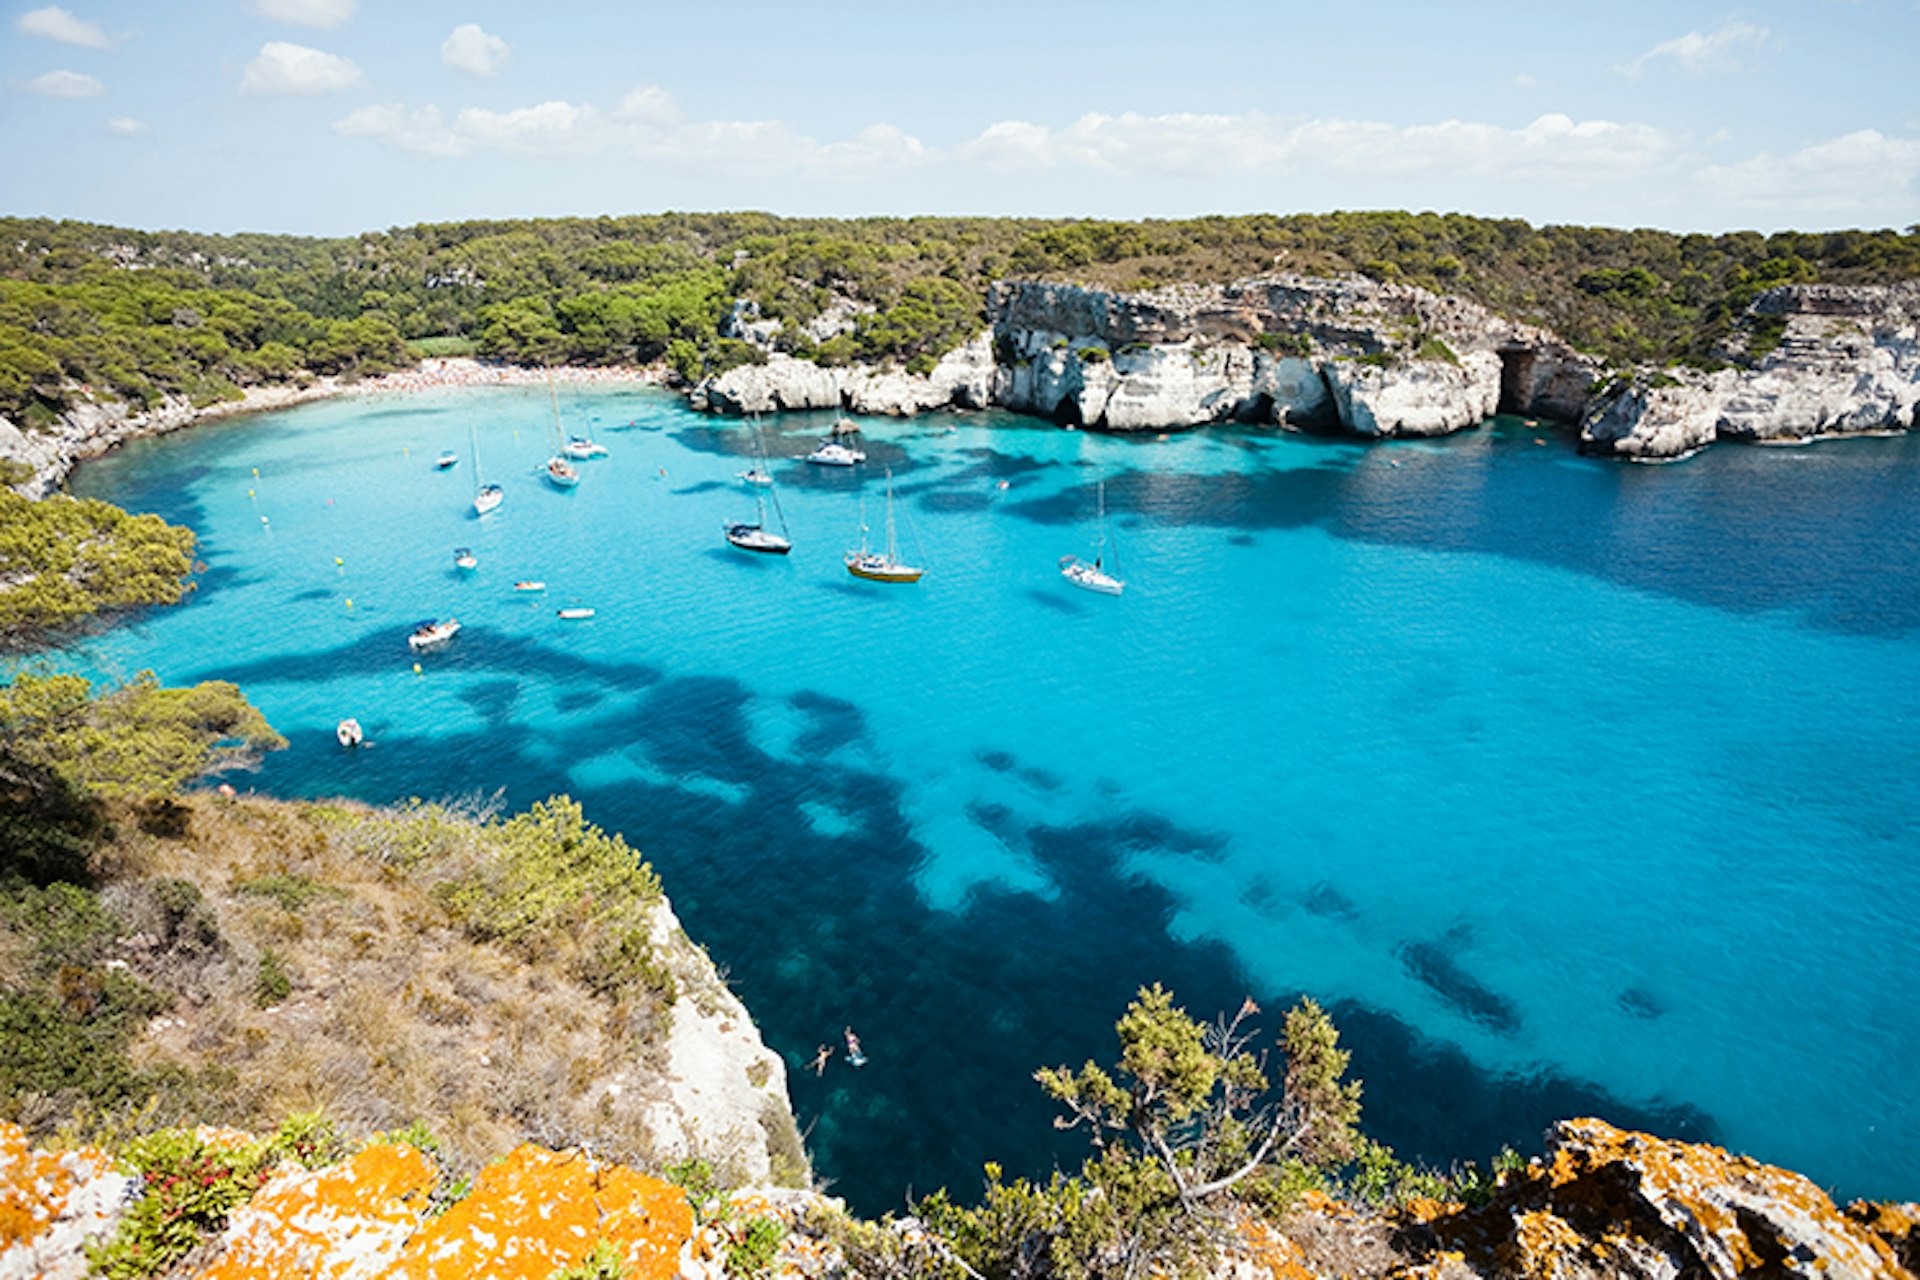 Cala Macarella is one of the hidden delights of Menorca. Image by tagstiles.com - S.Gruene / Shutterstock